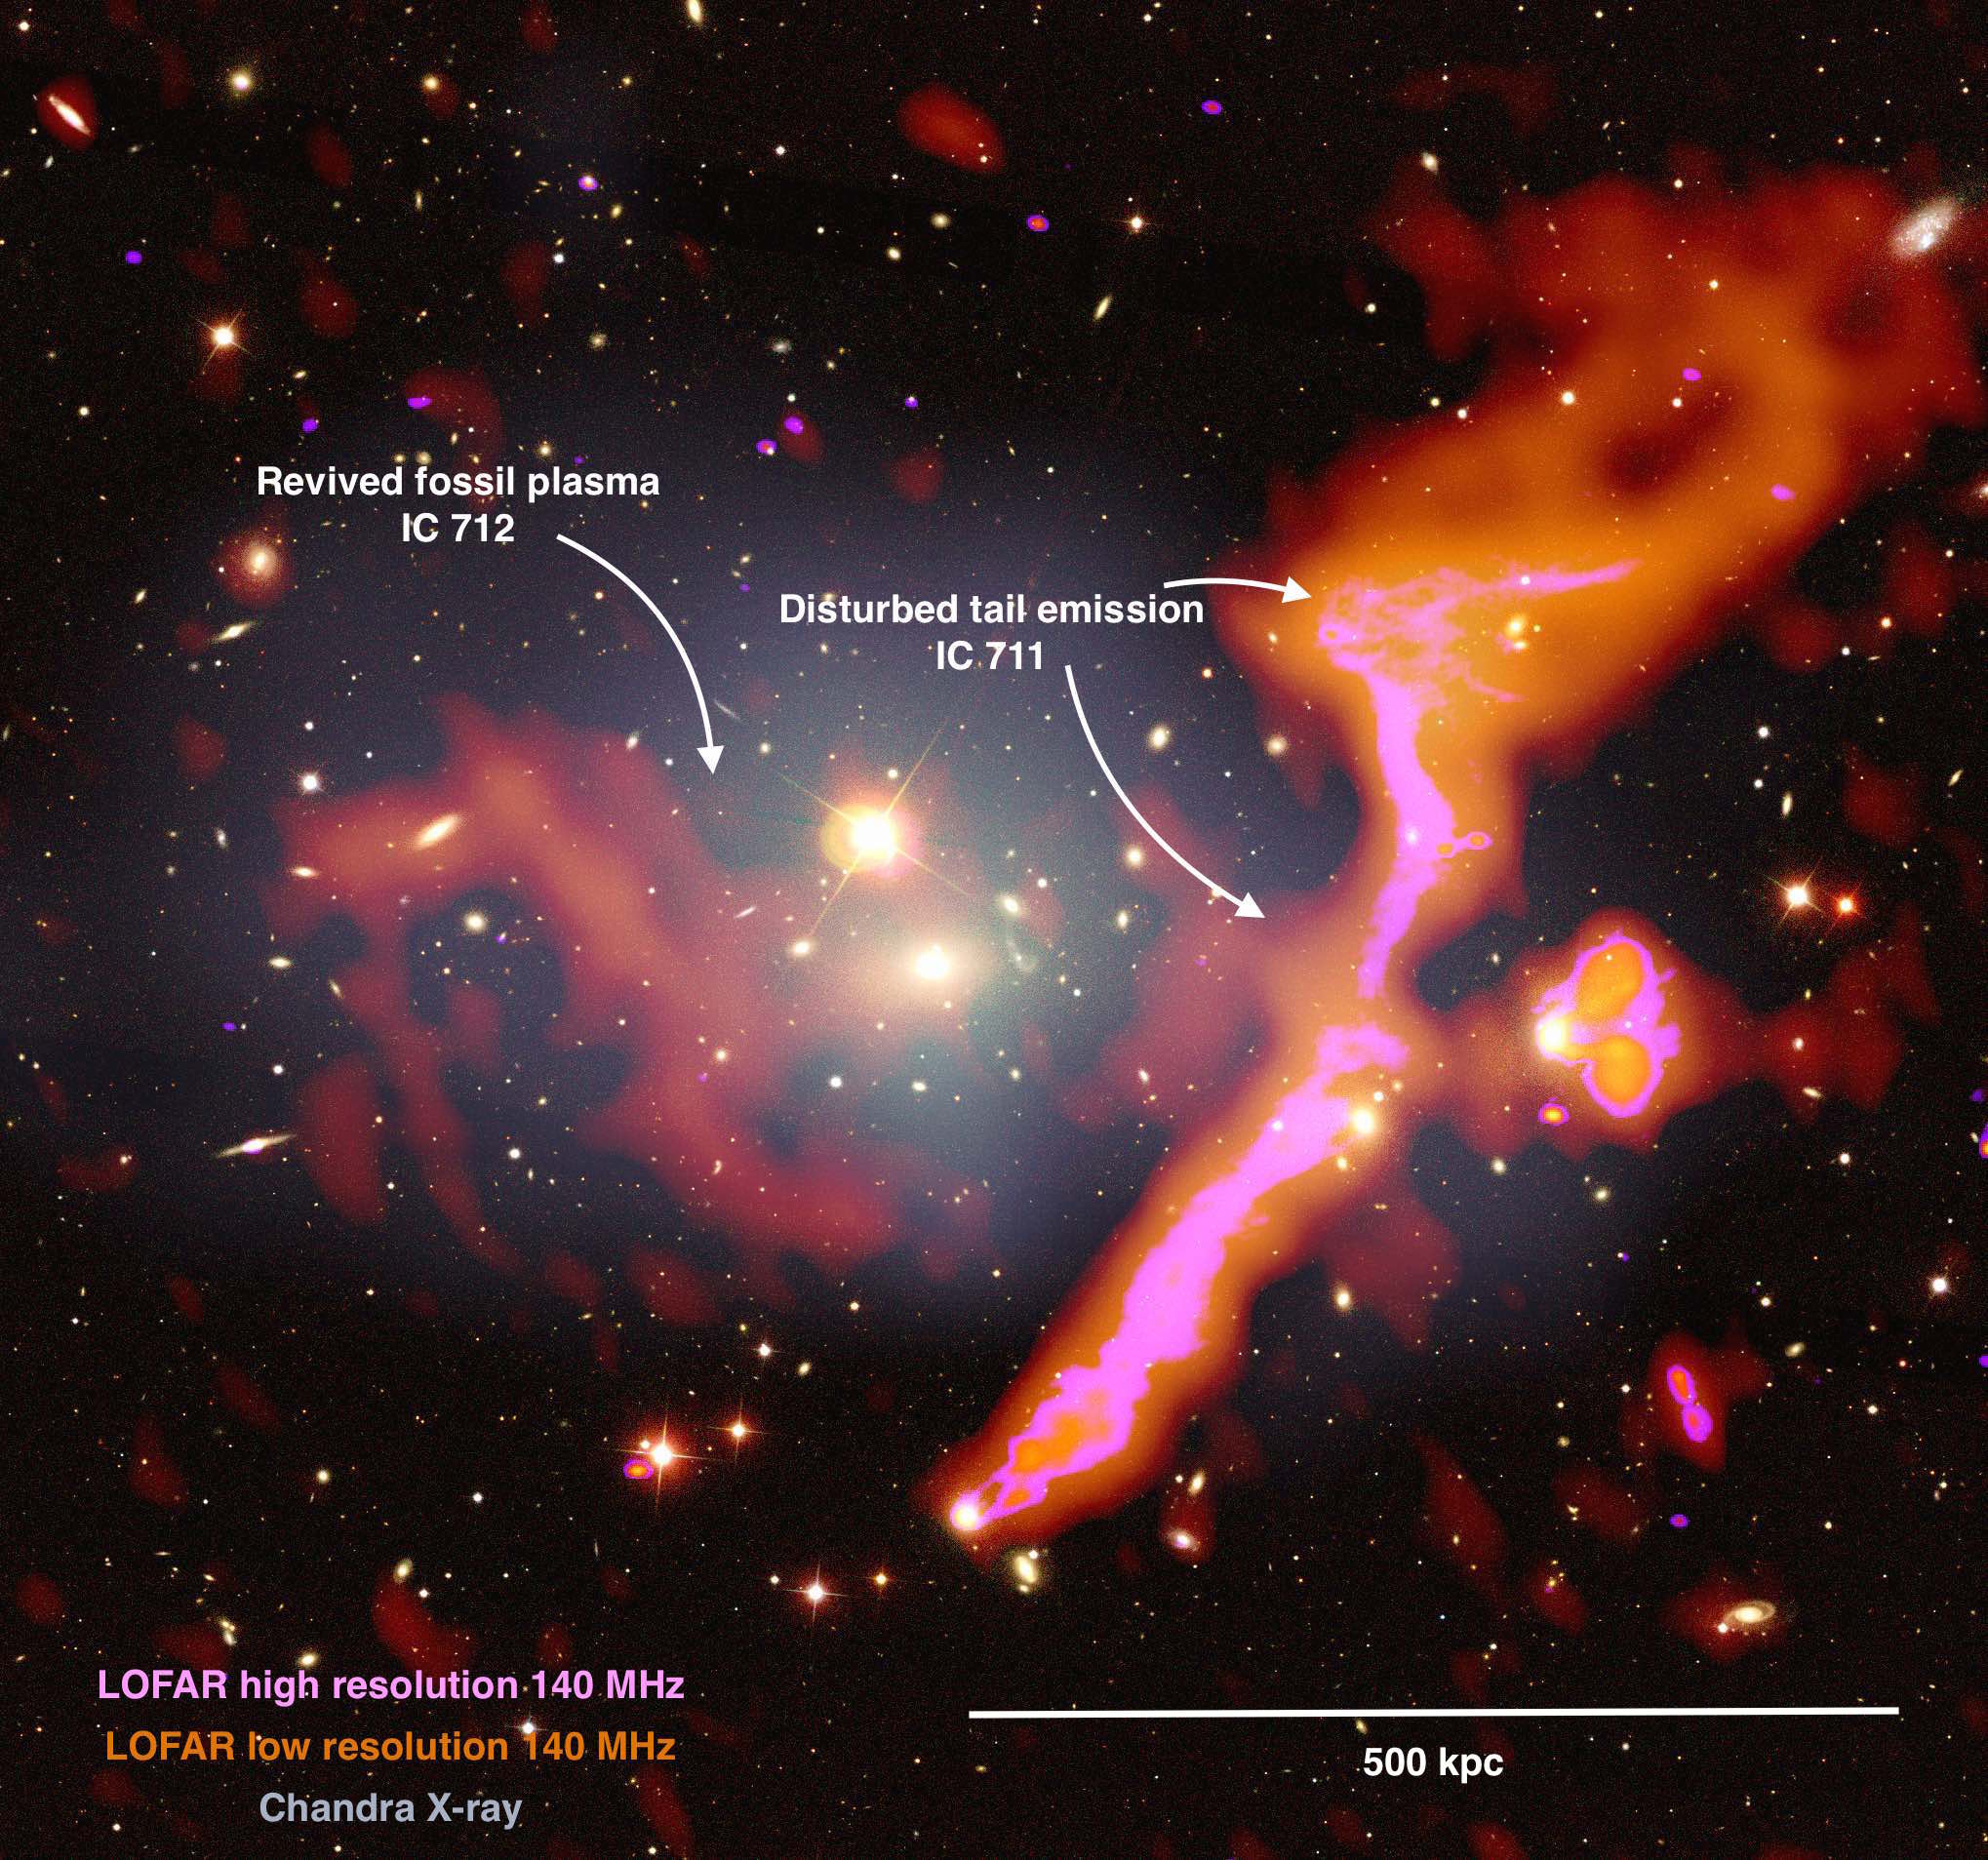 ALMA Scientists Find Pair of Black Holes Dining Together in Nearby Galaxy  Merger - National Radio Astronomy Observatory